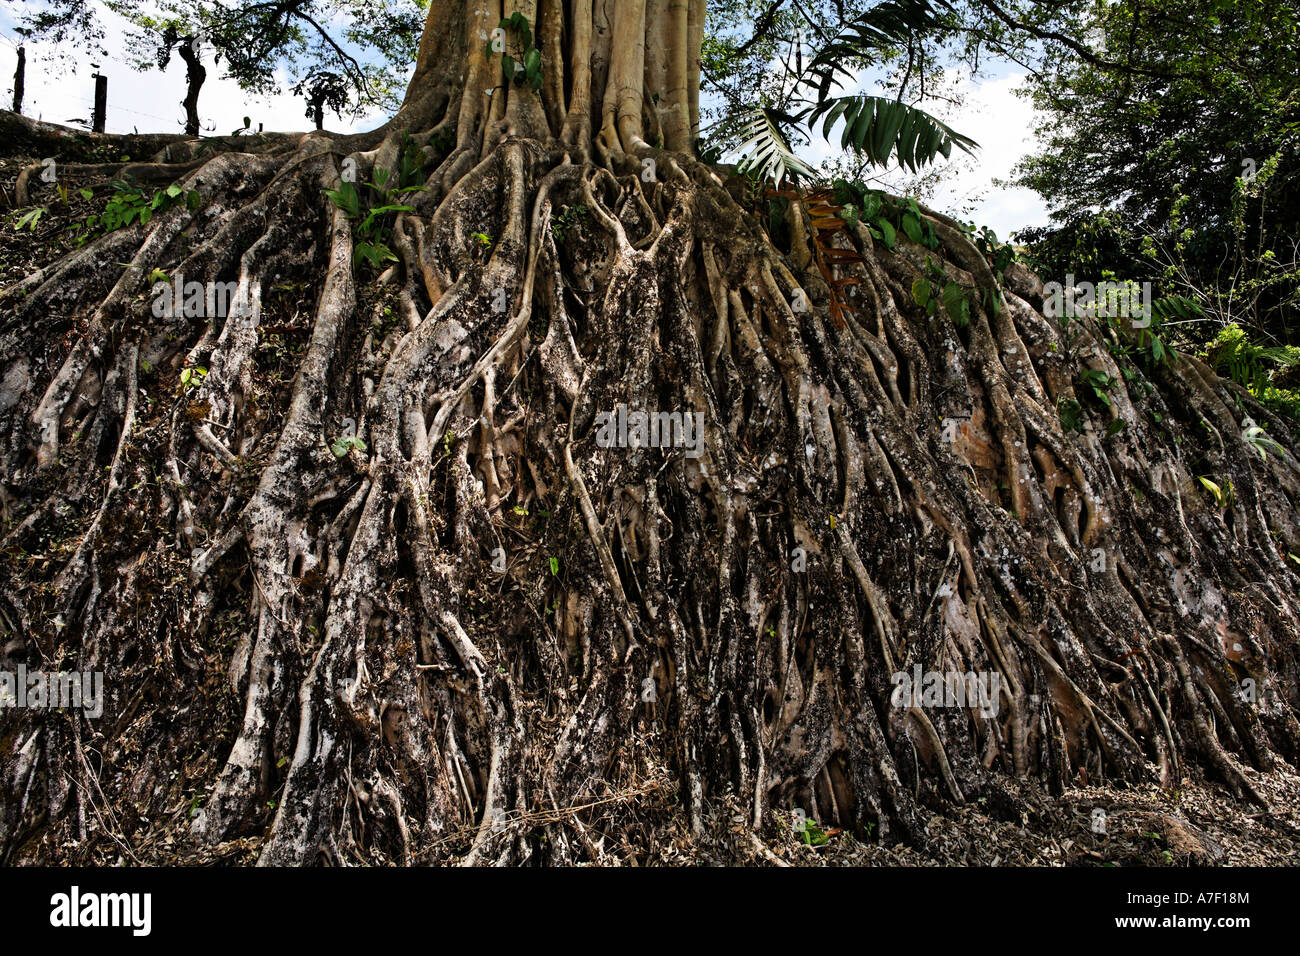 Roots of a big tree, Banyan Tree, Ficus benghalensis, Costa Rica Stock Photo